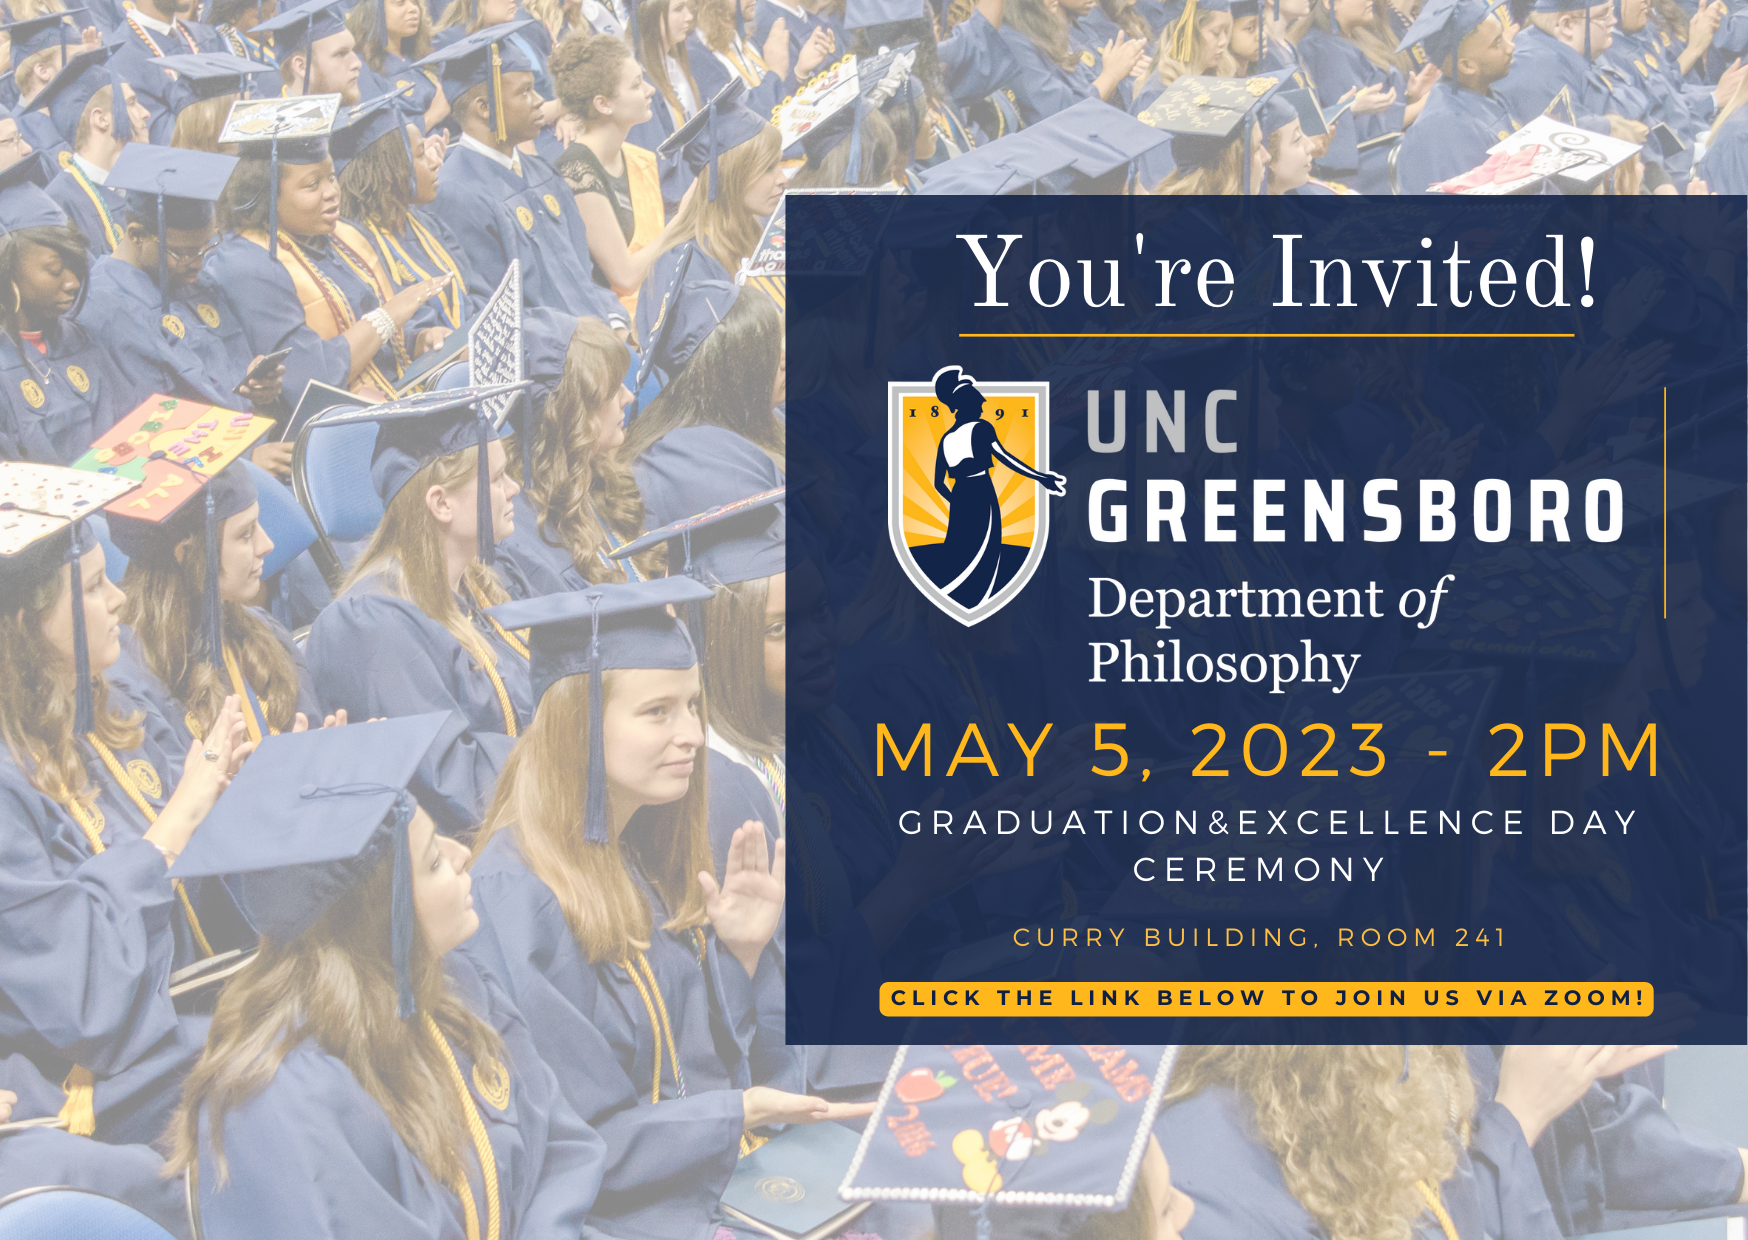 Featured Image for Graduation & Excellence Day Ceremony 2023